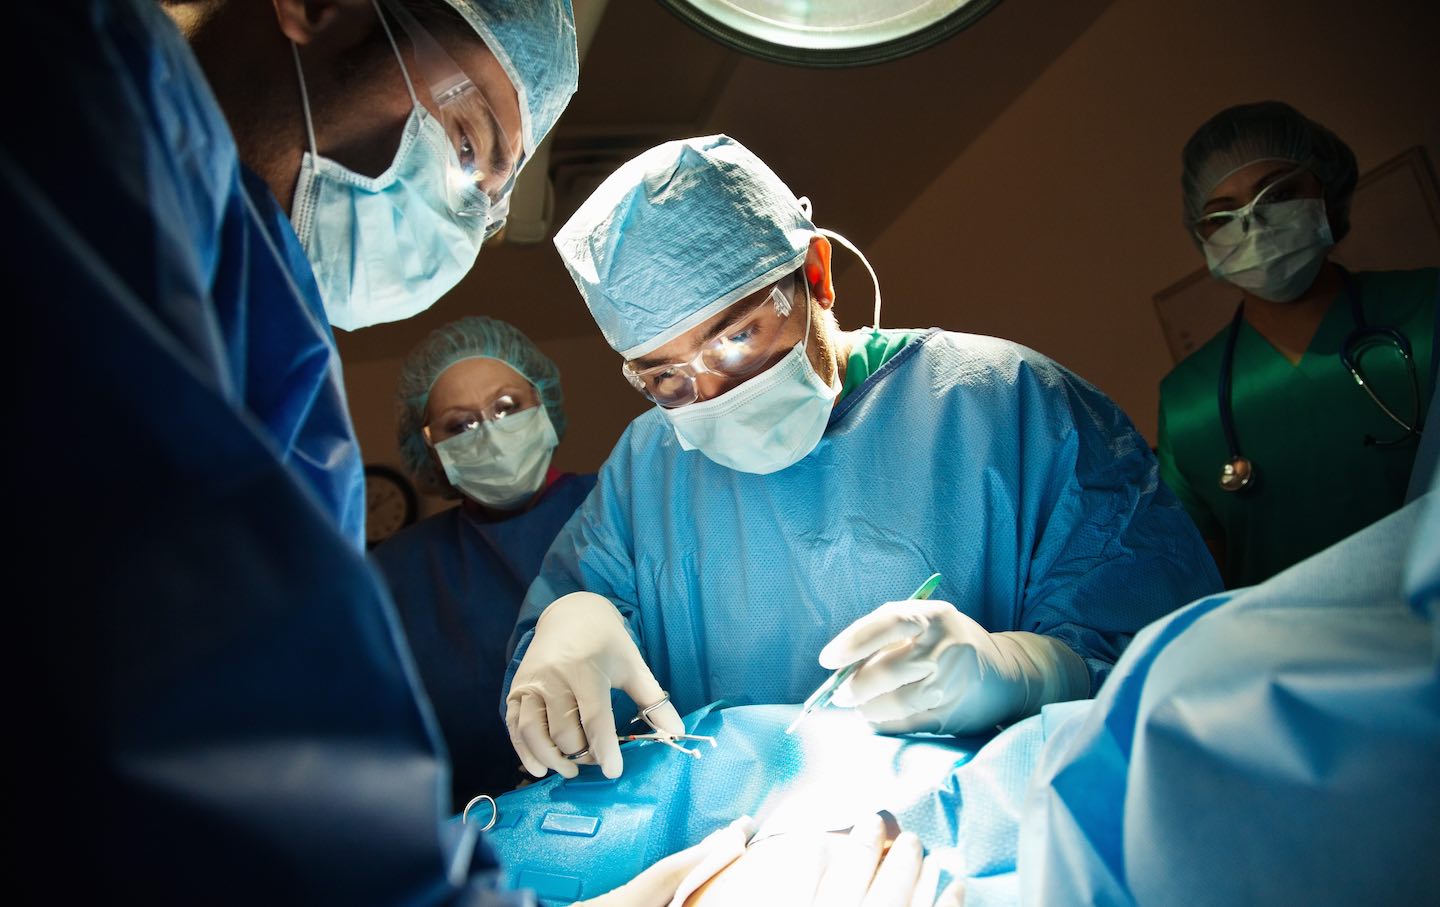 Surgeons performing C-Section in operating room